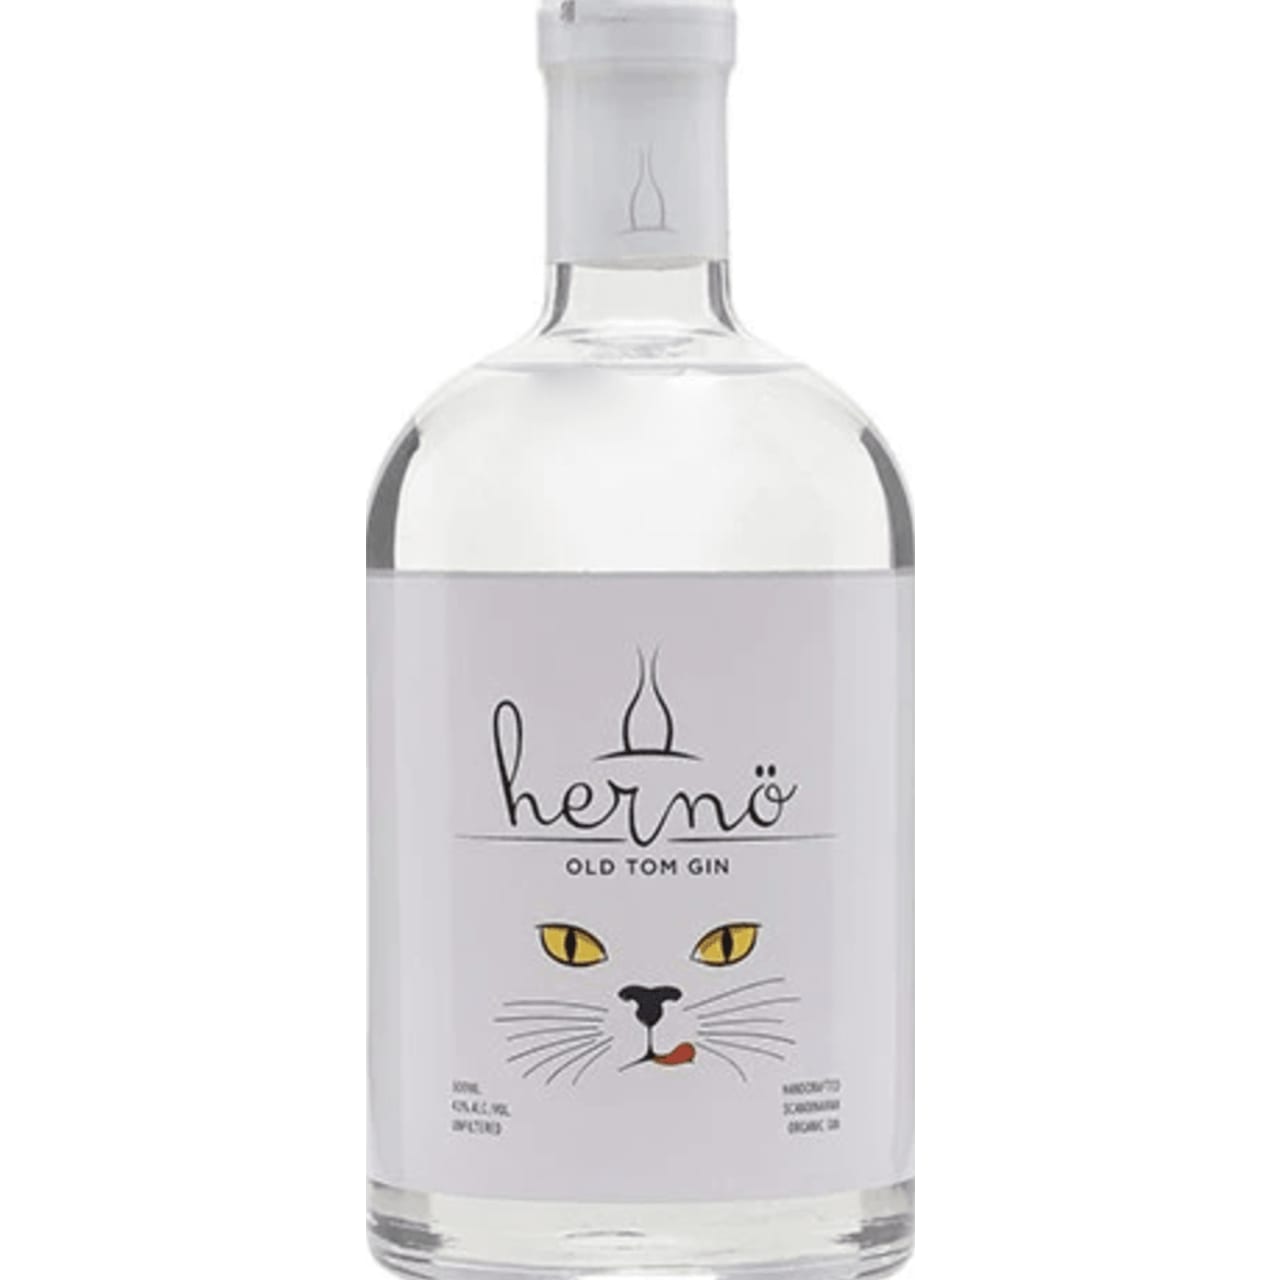 Hernö Old Tom Gin is made from the same distilled gin as Hernö Gin, but with an extra amount of Meadowsweet added in the distillation and after diluting it down to 43% they add a touch of sugar.